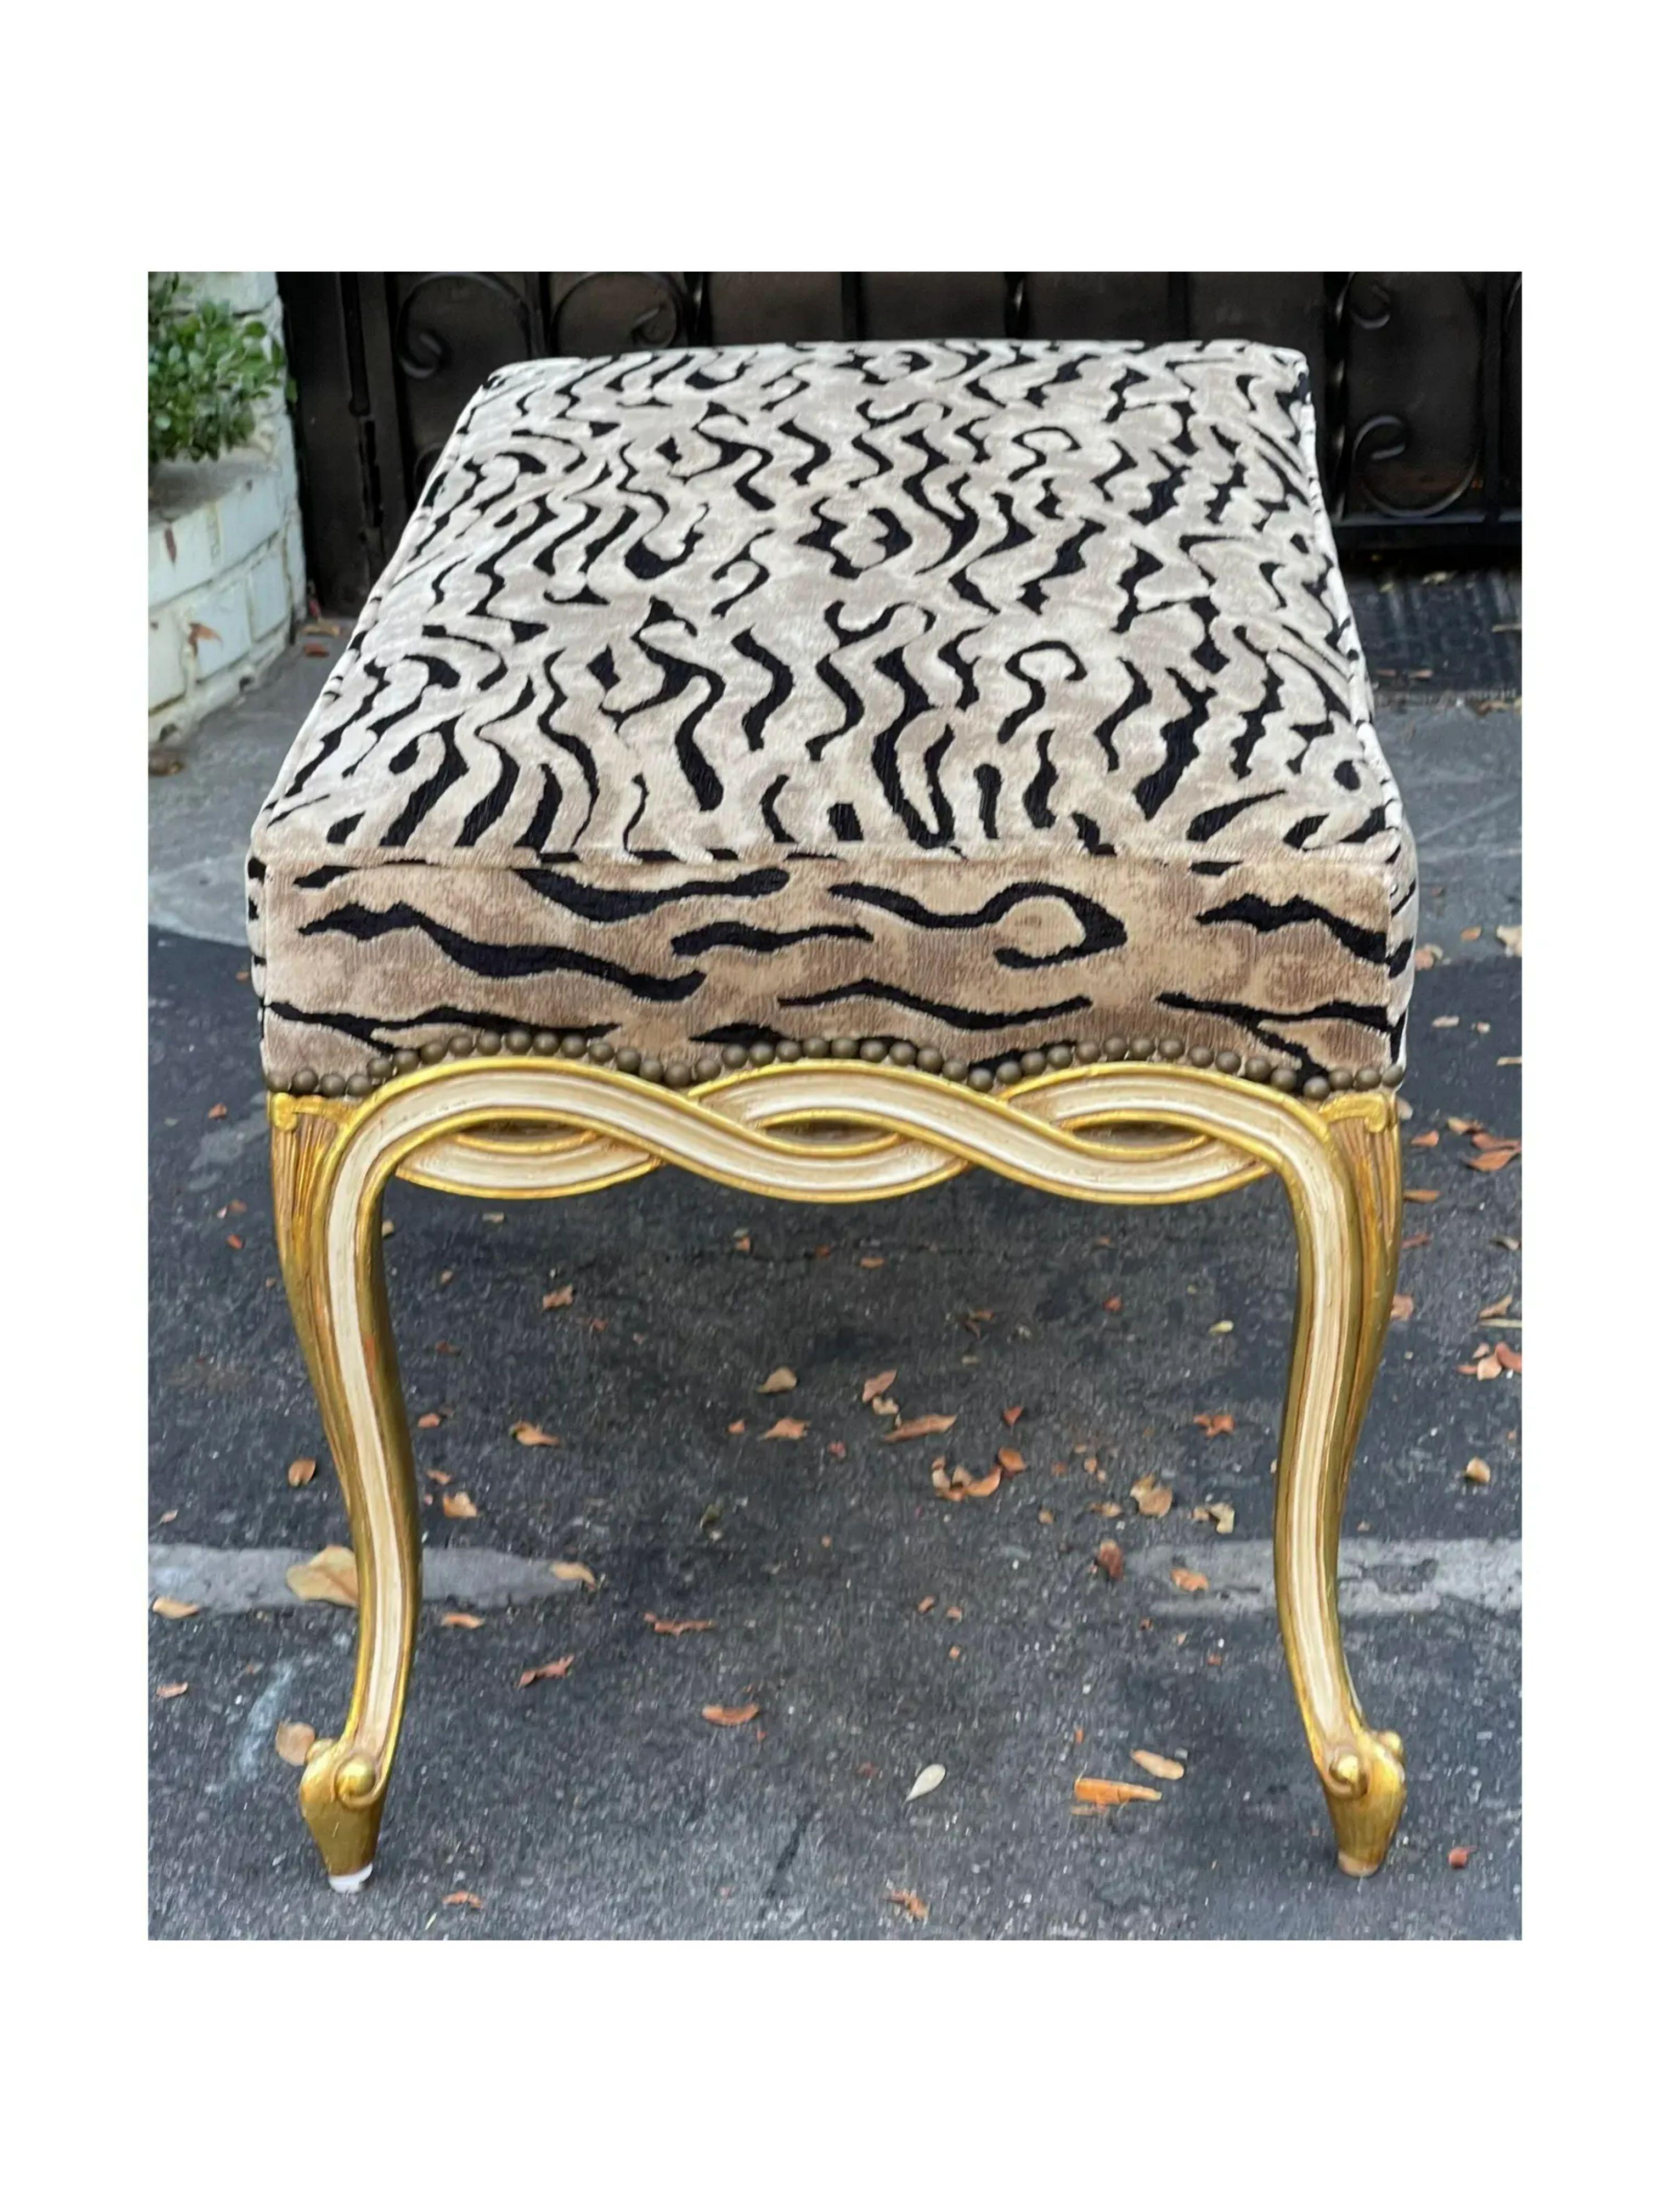 Regency Style Giltwood Ribbon Bench with Zebra Velvet by Randy Esada Designs In Good Condition For Sale In LOS ANGELES, CA